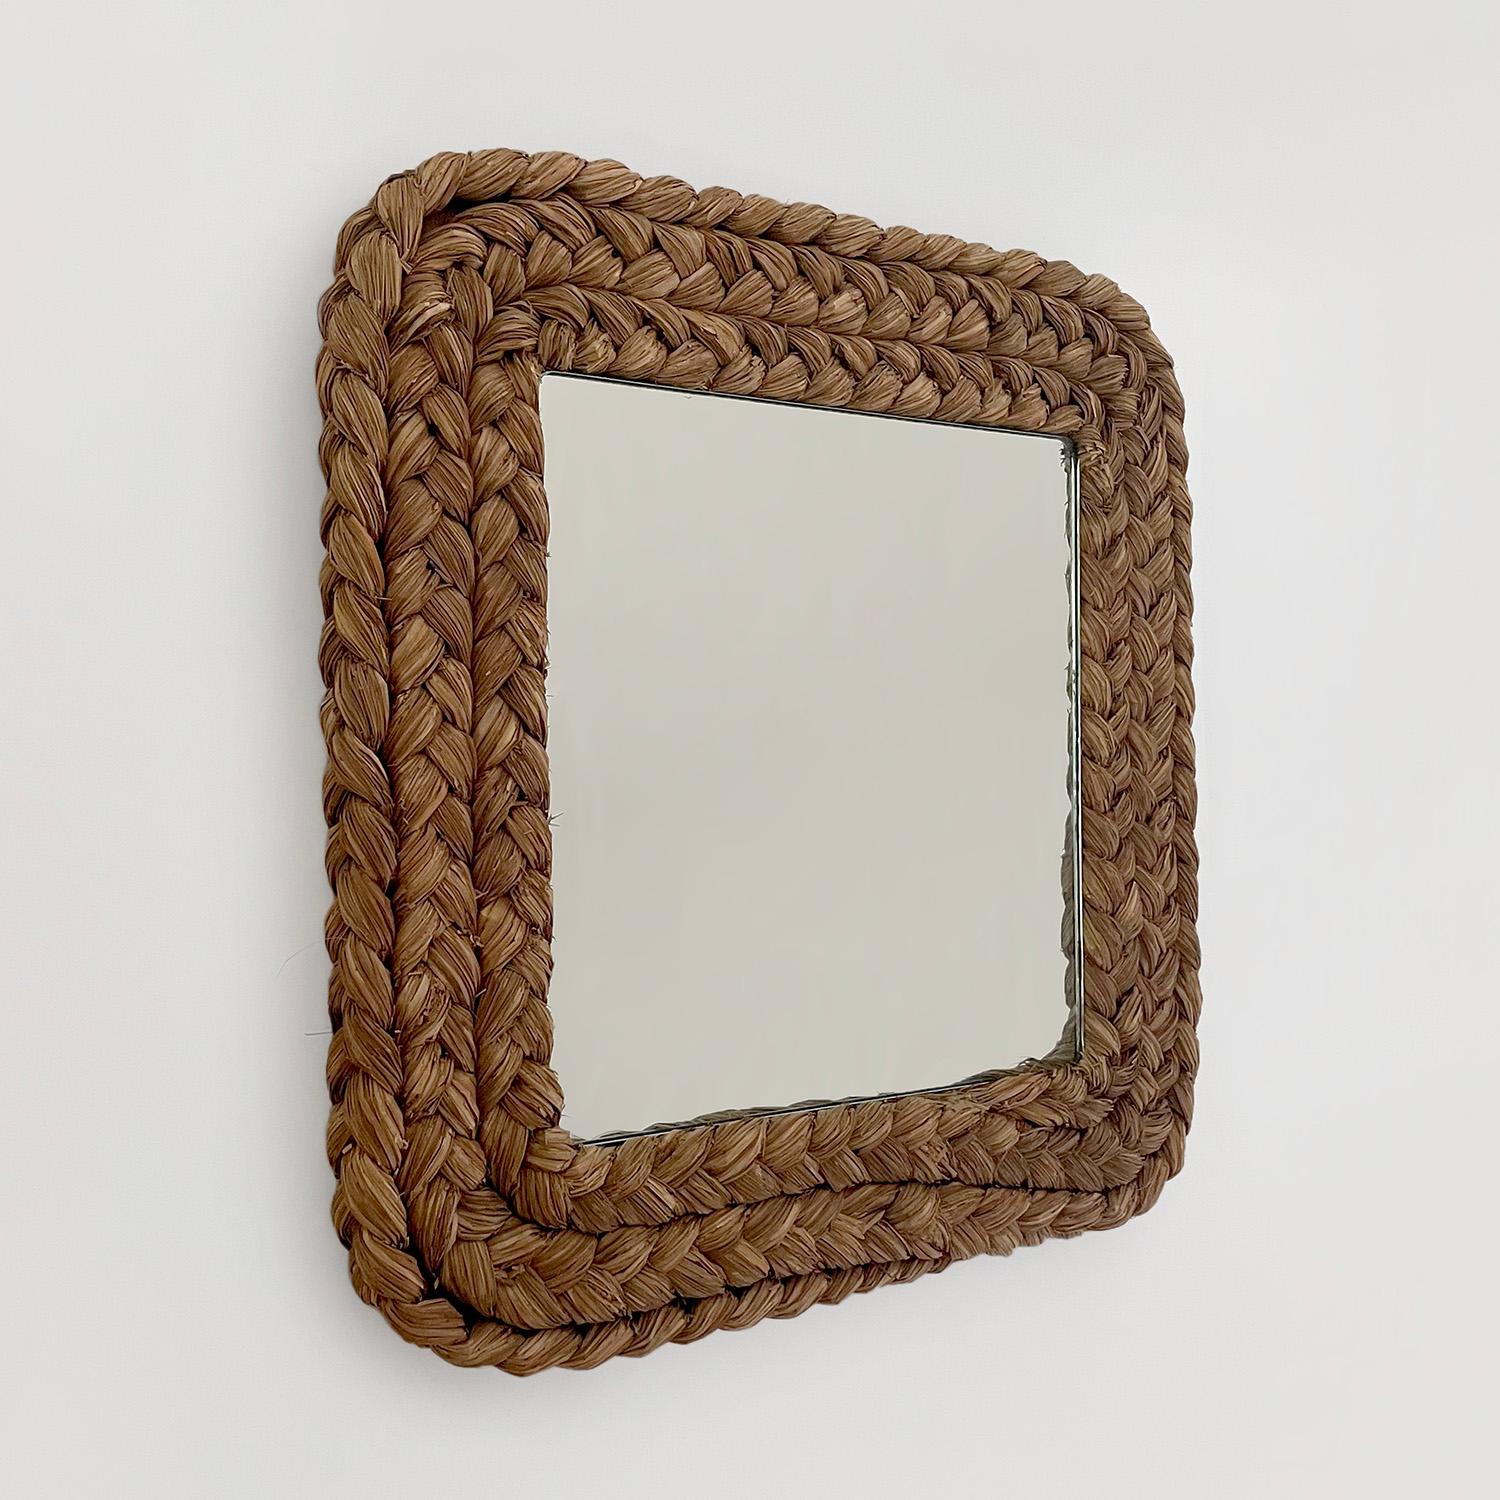 Audoux Minet coiled rope wall mirror
France, circa 1950’s
Coiled mirror frame is comprised of braided sea grass rope
Organic texture and feel
Natural color variations
Patina from age and use


We have a large collection of Audoux-Minet pieces
Please